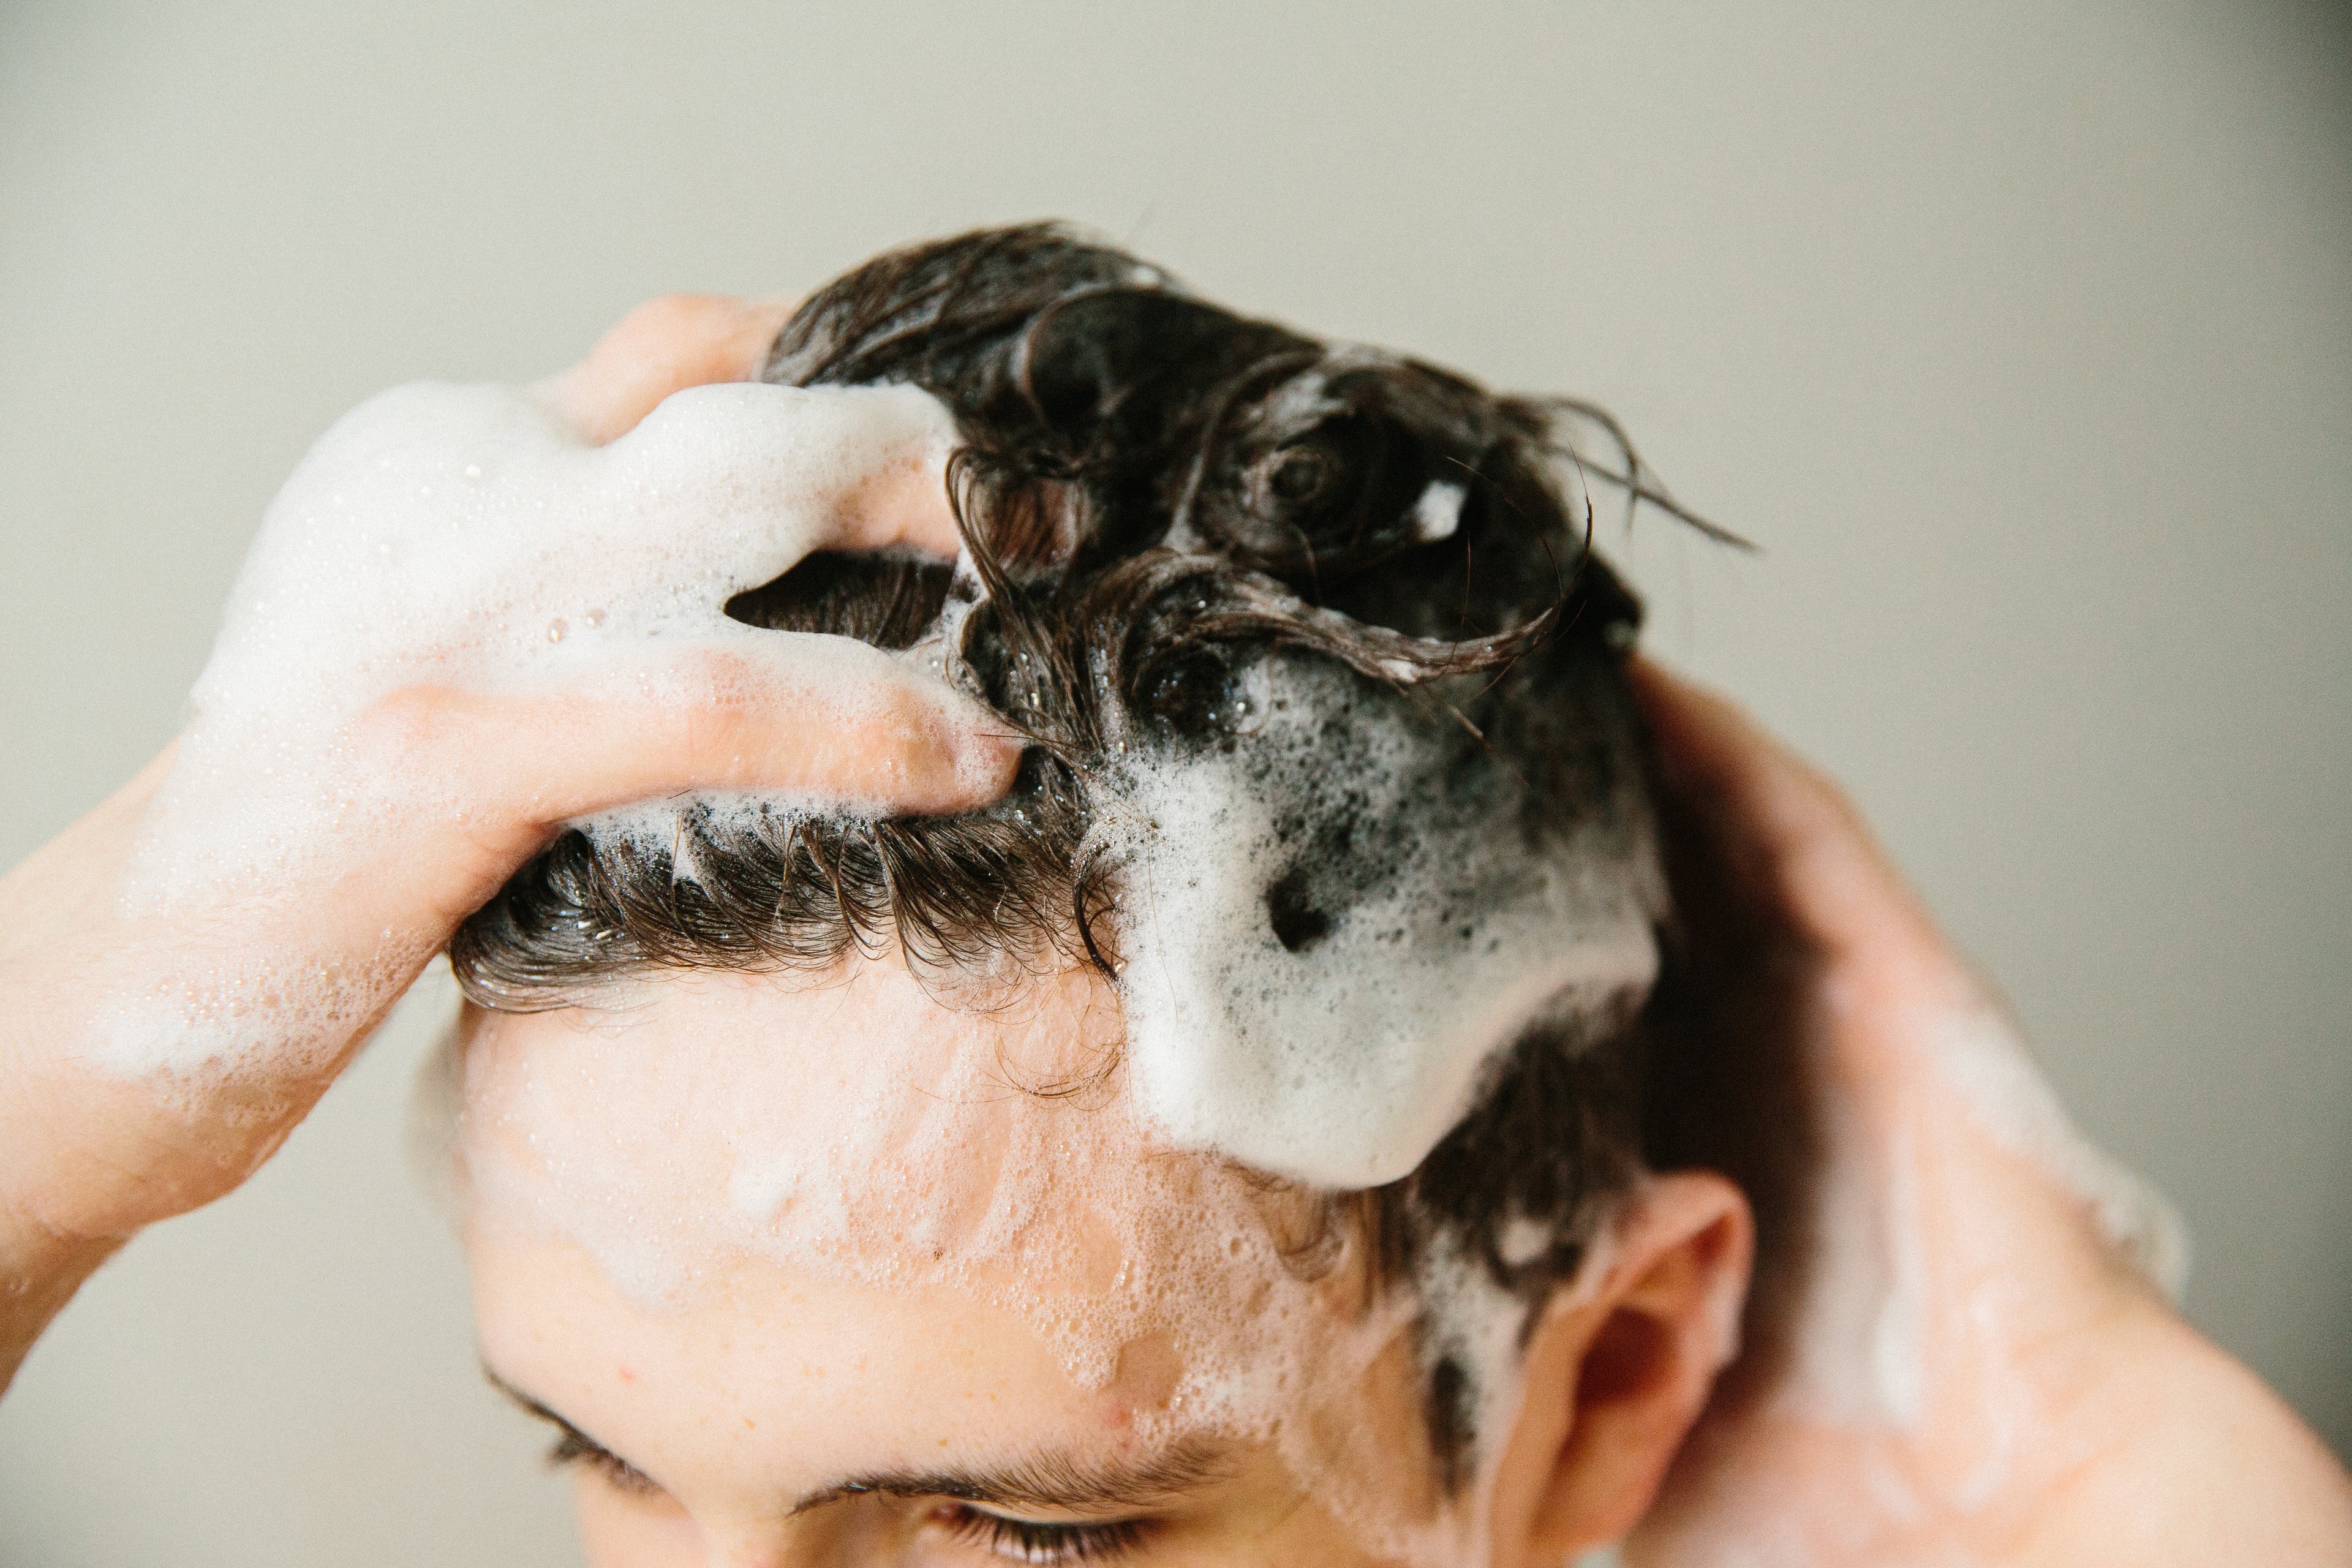 The image shows the top of the model's head as they lather in the creamy shampoo into short brown hair with bubbles and suds.